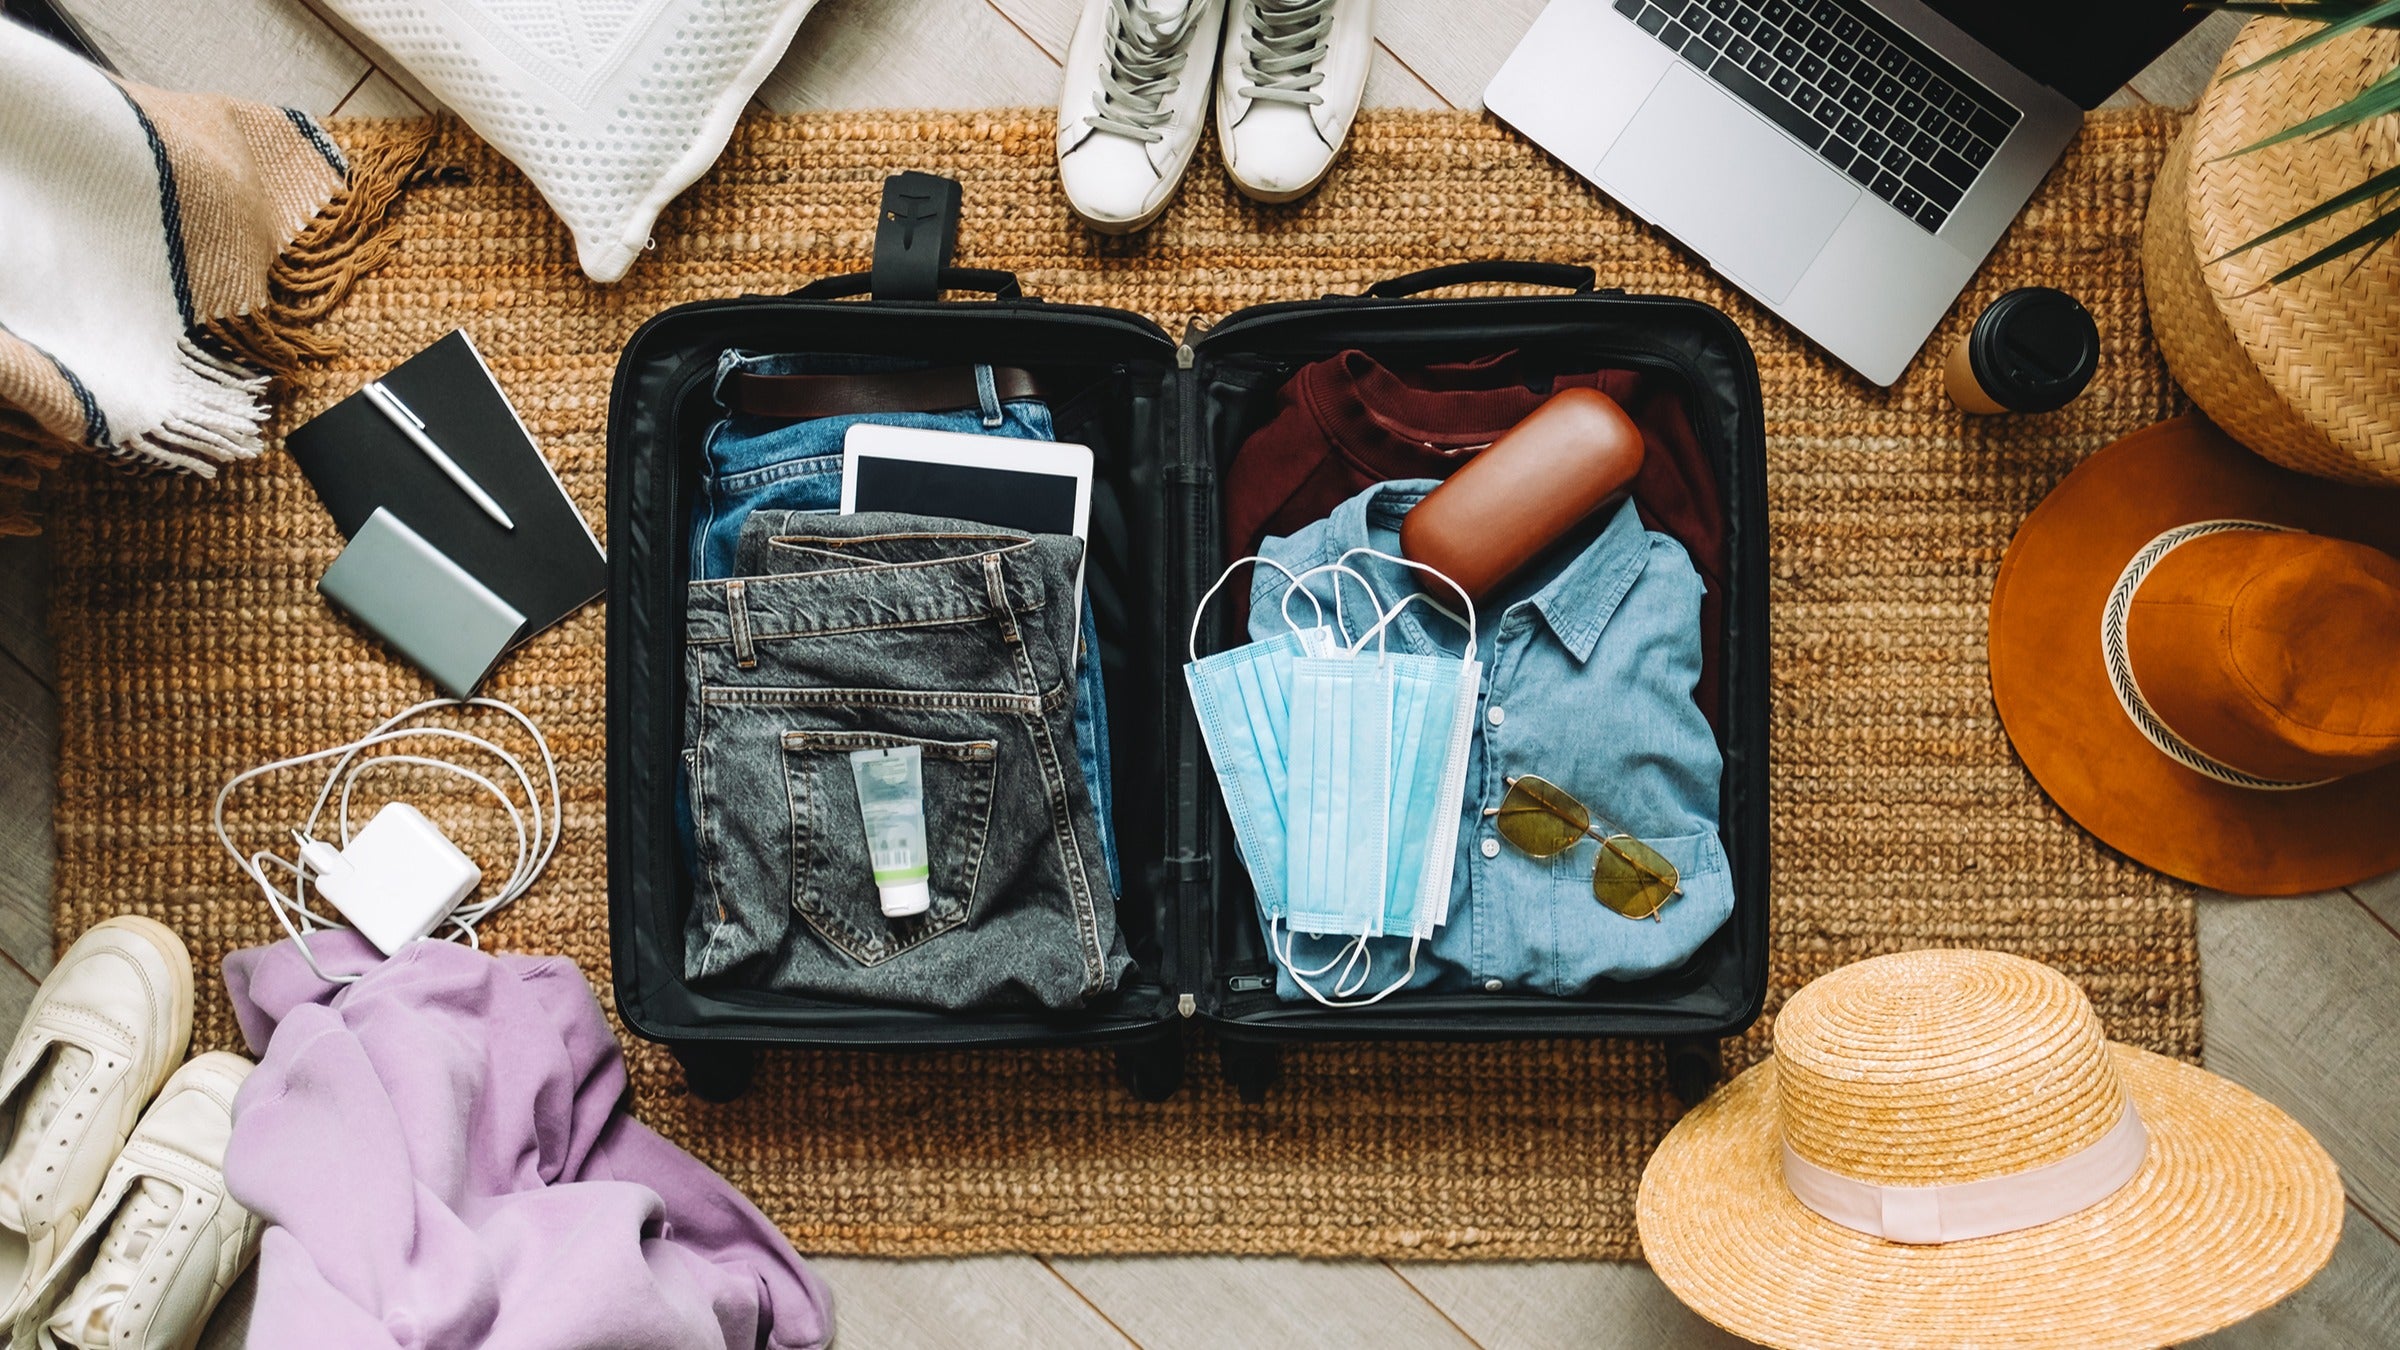 Overhead shot of packing a suitcase. The suitcase is full of clothes, face masks, and sunglasses. There are hats, shoes, and other miscellaneous things to pack surrounding the suitcase on the floor.